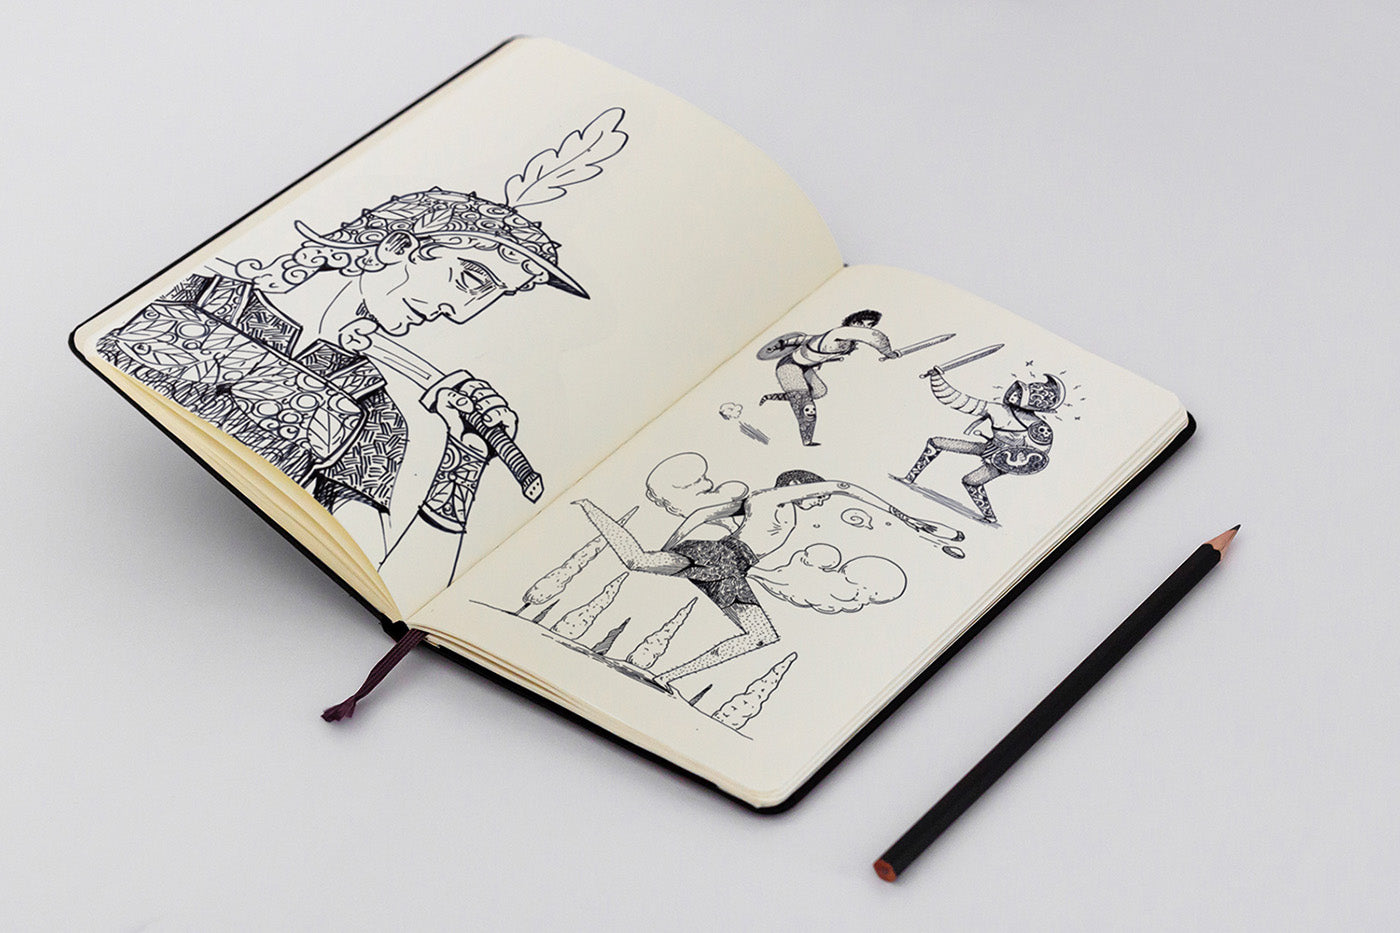 Why You Should Start a Daily Sketchbook Habit